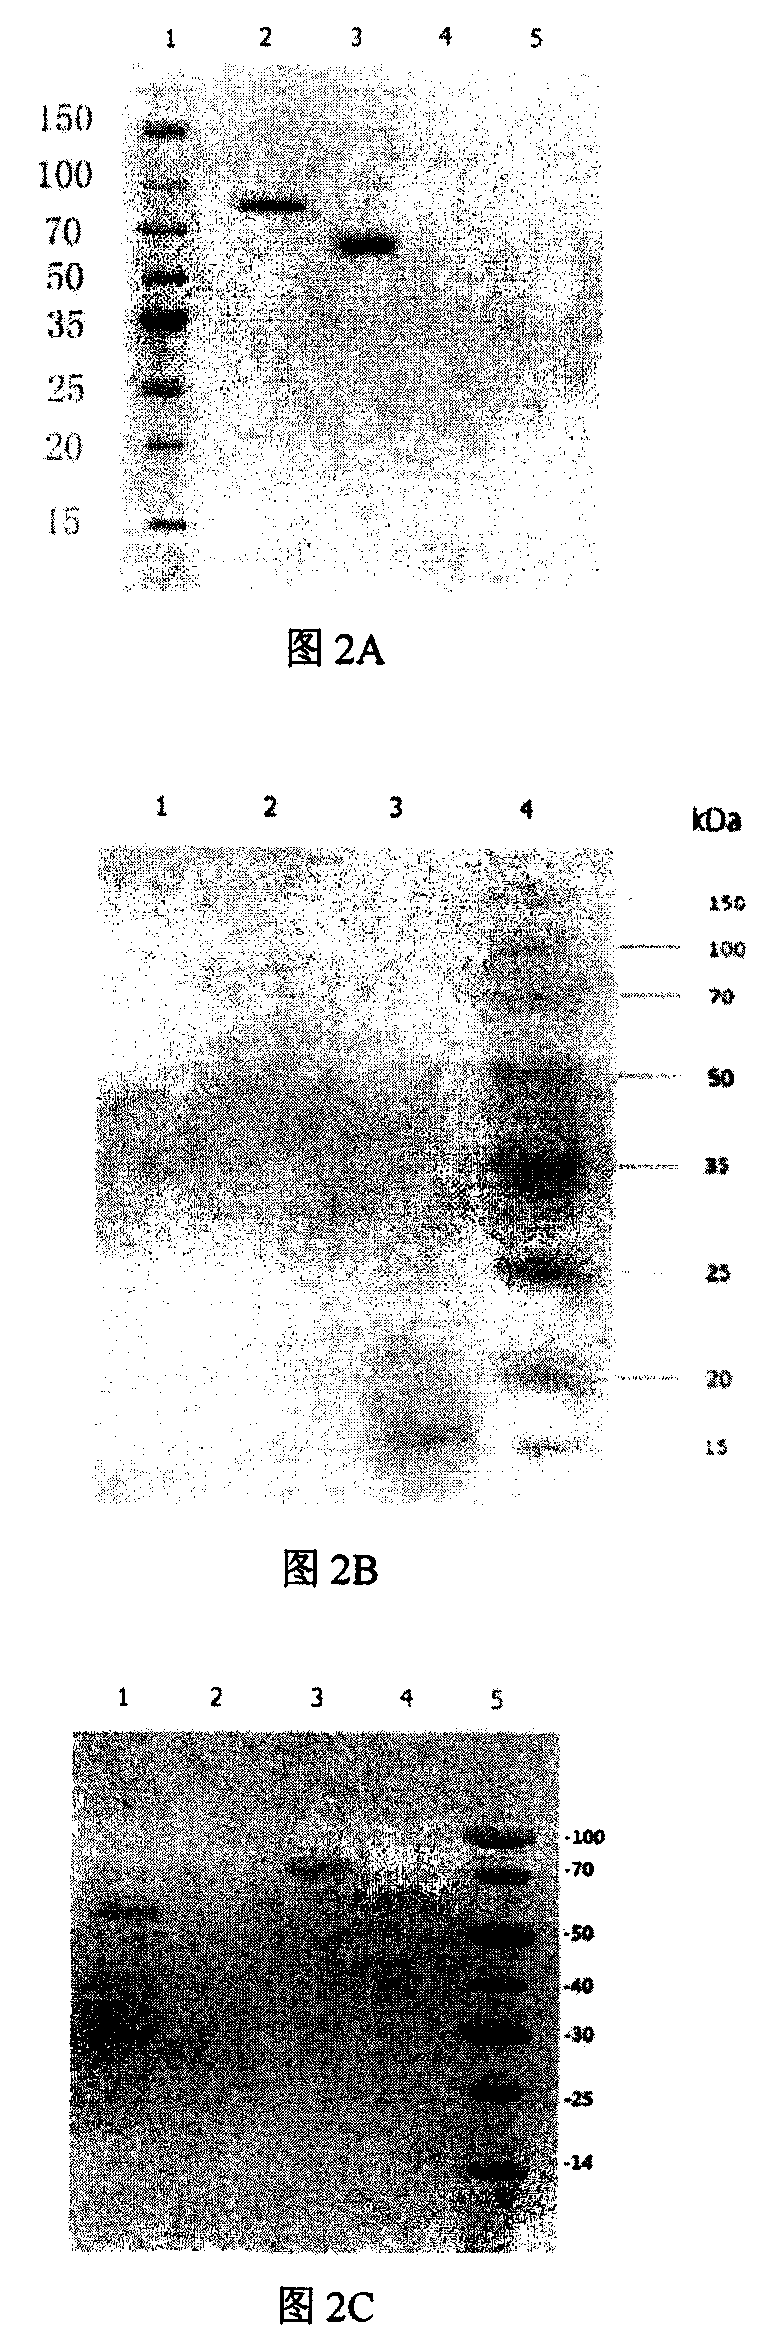 Linear 23 peptide capable of coupling single B cell epitope or hapten to prepare immunomodulating peptide and antibody and application thereof